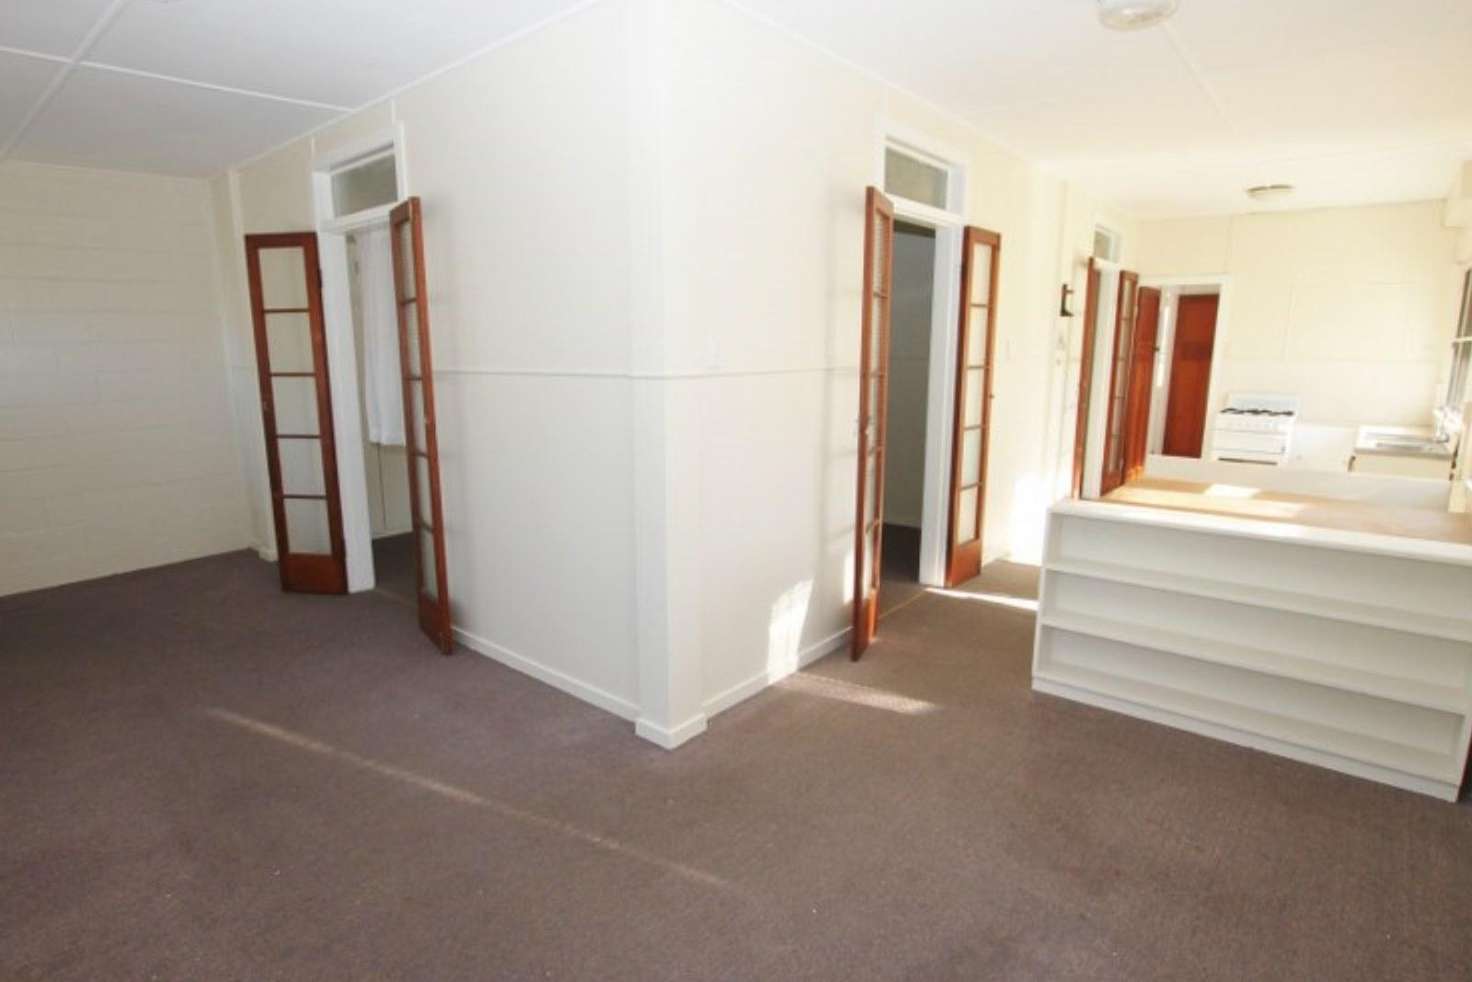 Main view of Homely apartment listing, 3/200 Talford Street, Allenstown QLD 4700